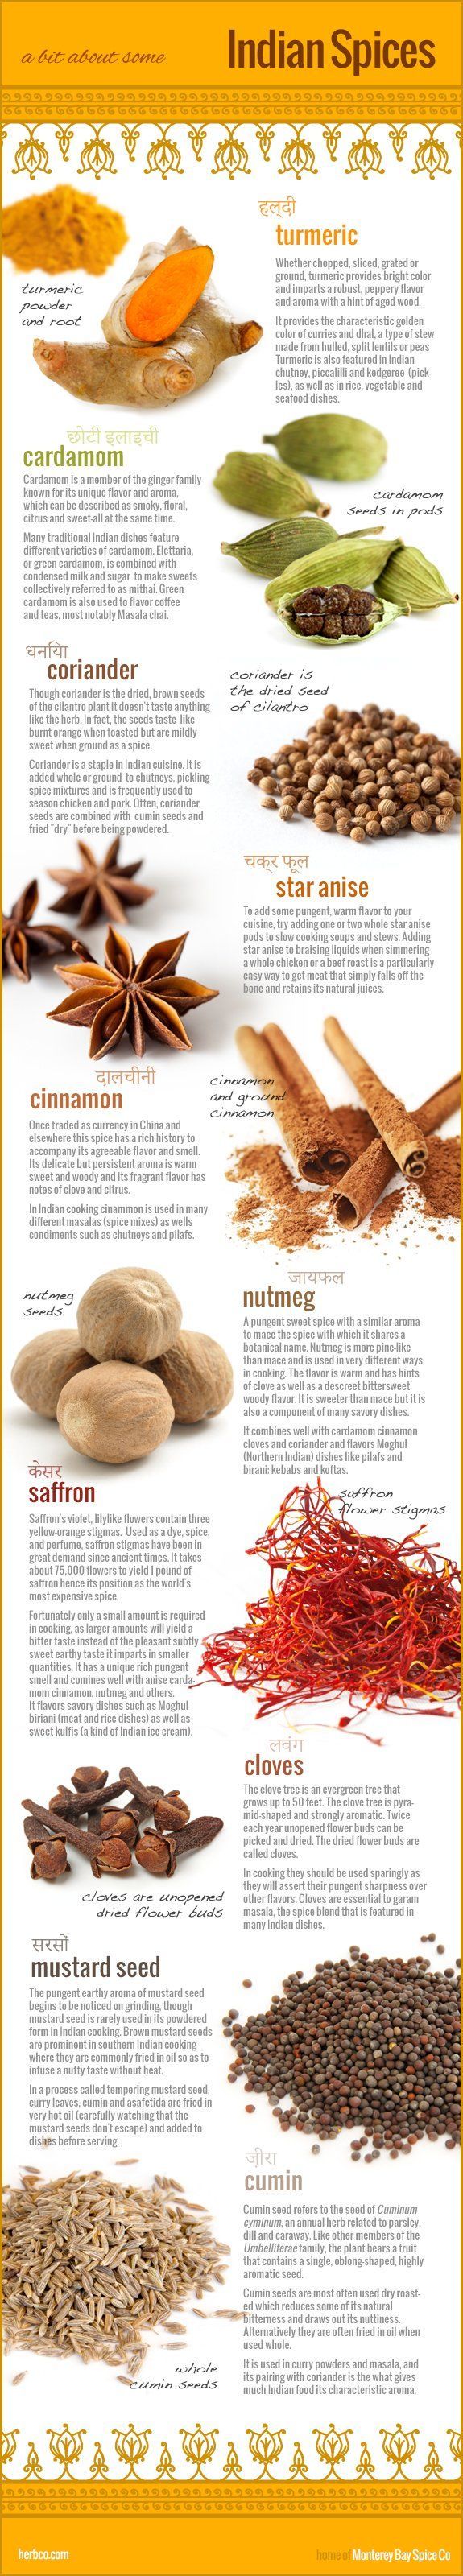 Indian Spices Infographic